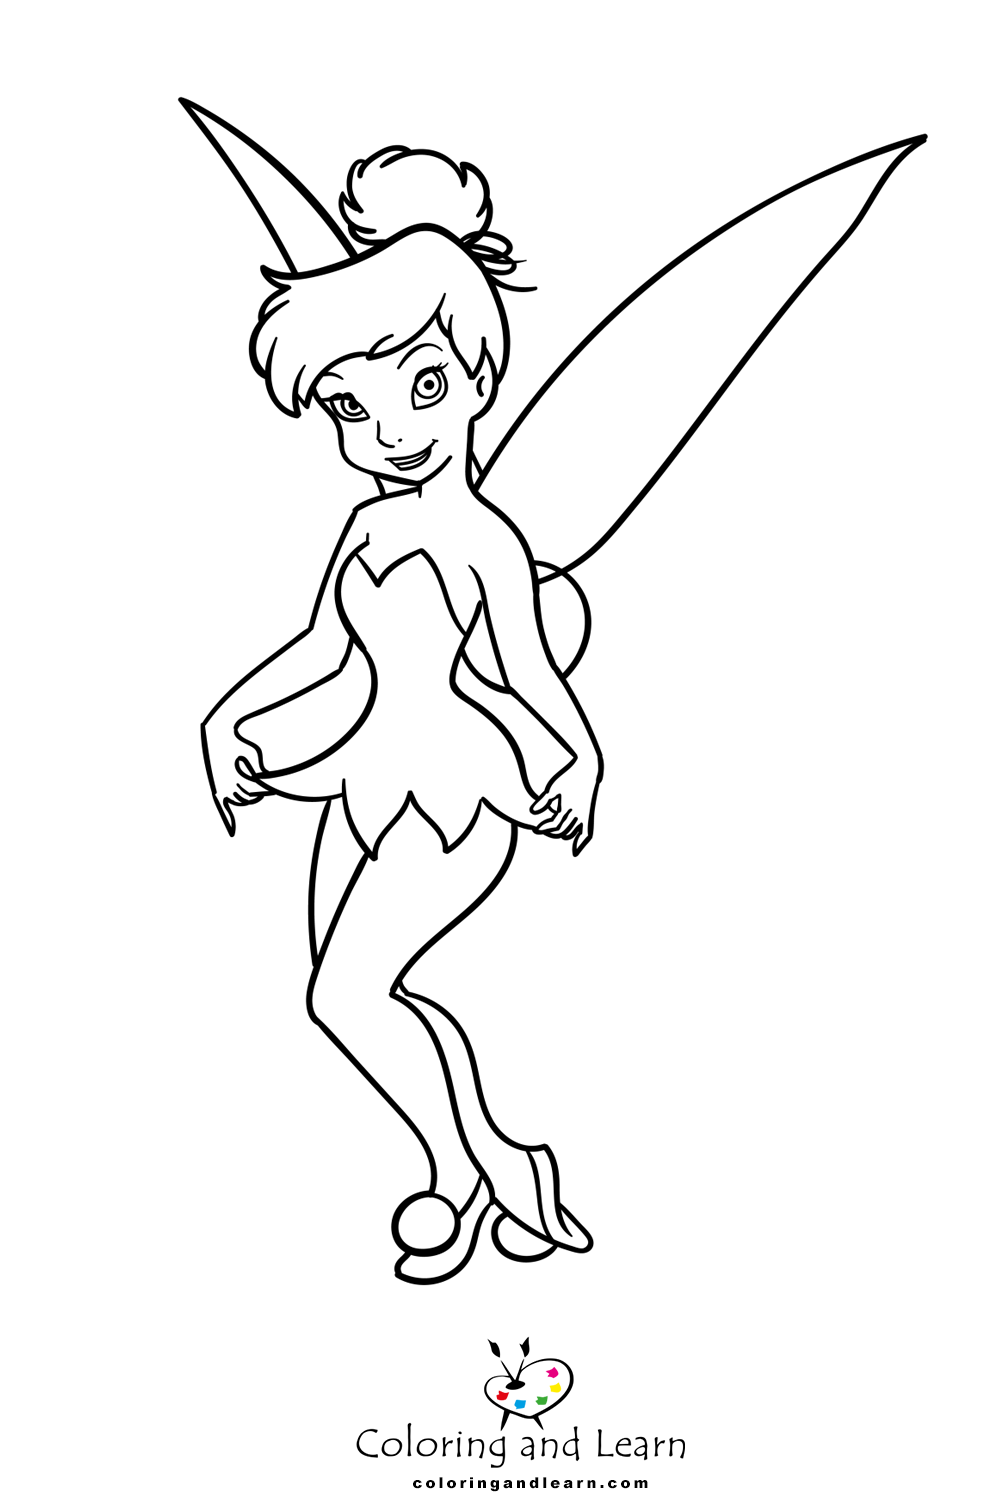 Tinkerbell coloring pages rcoloringpages